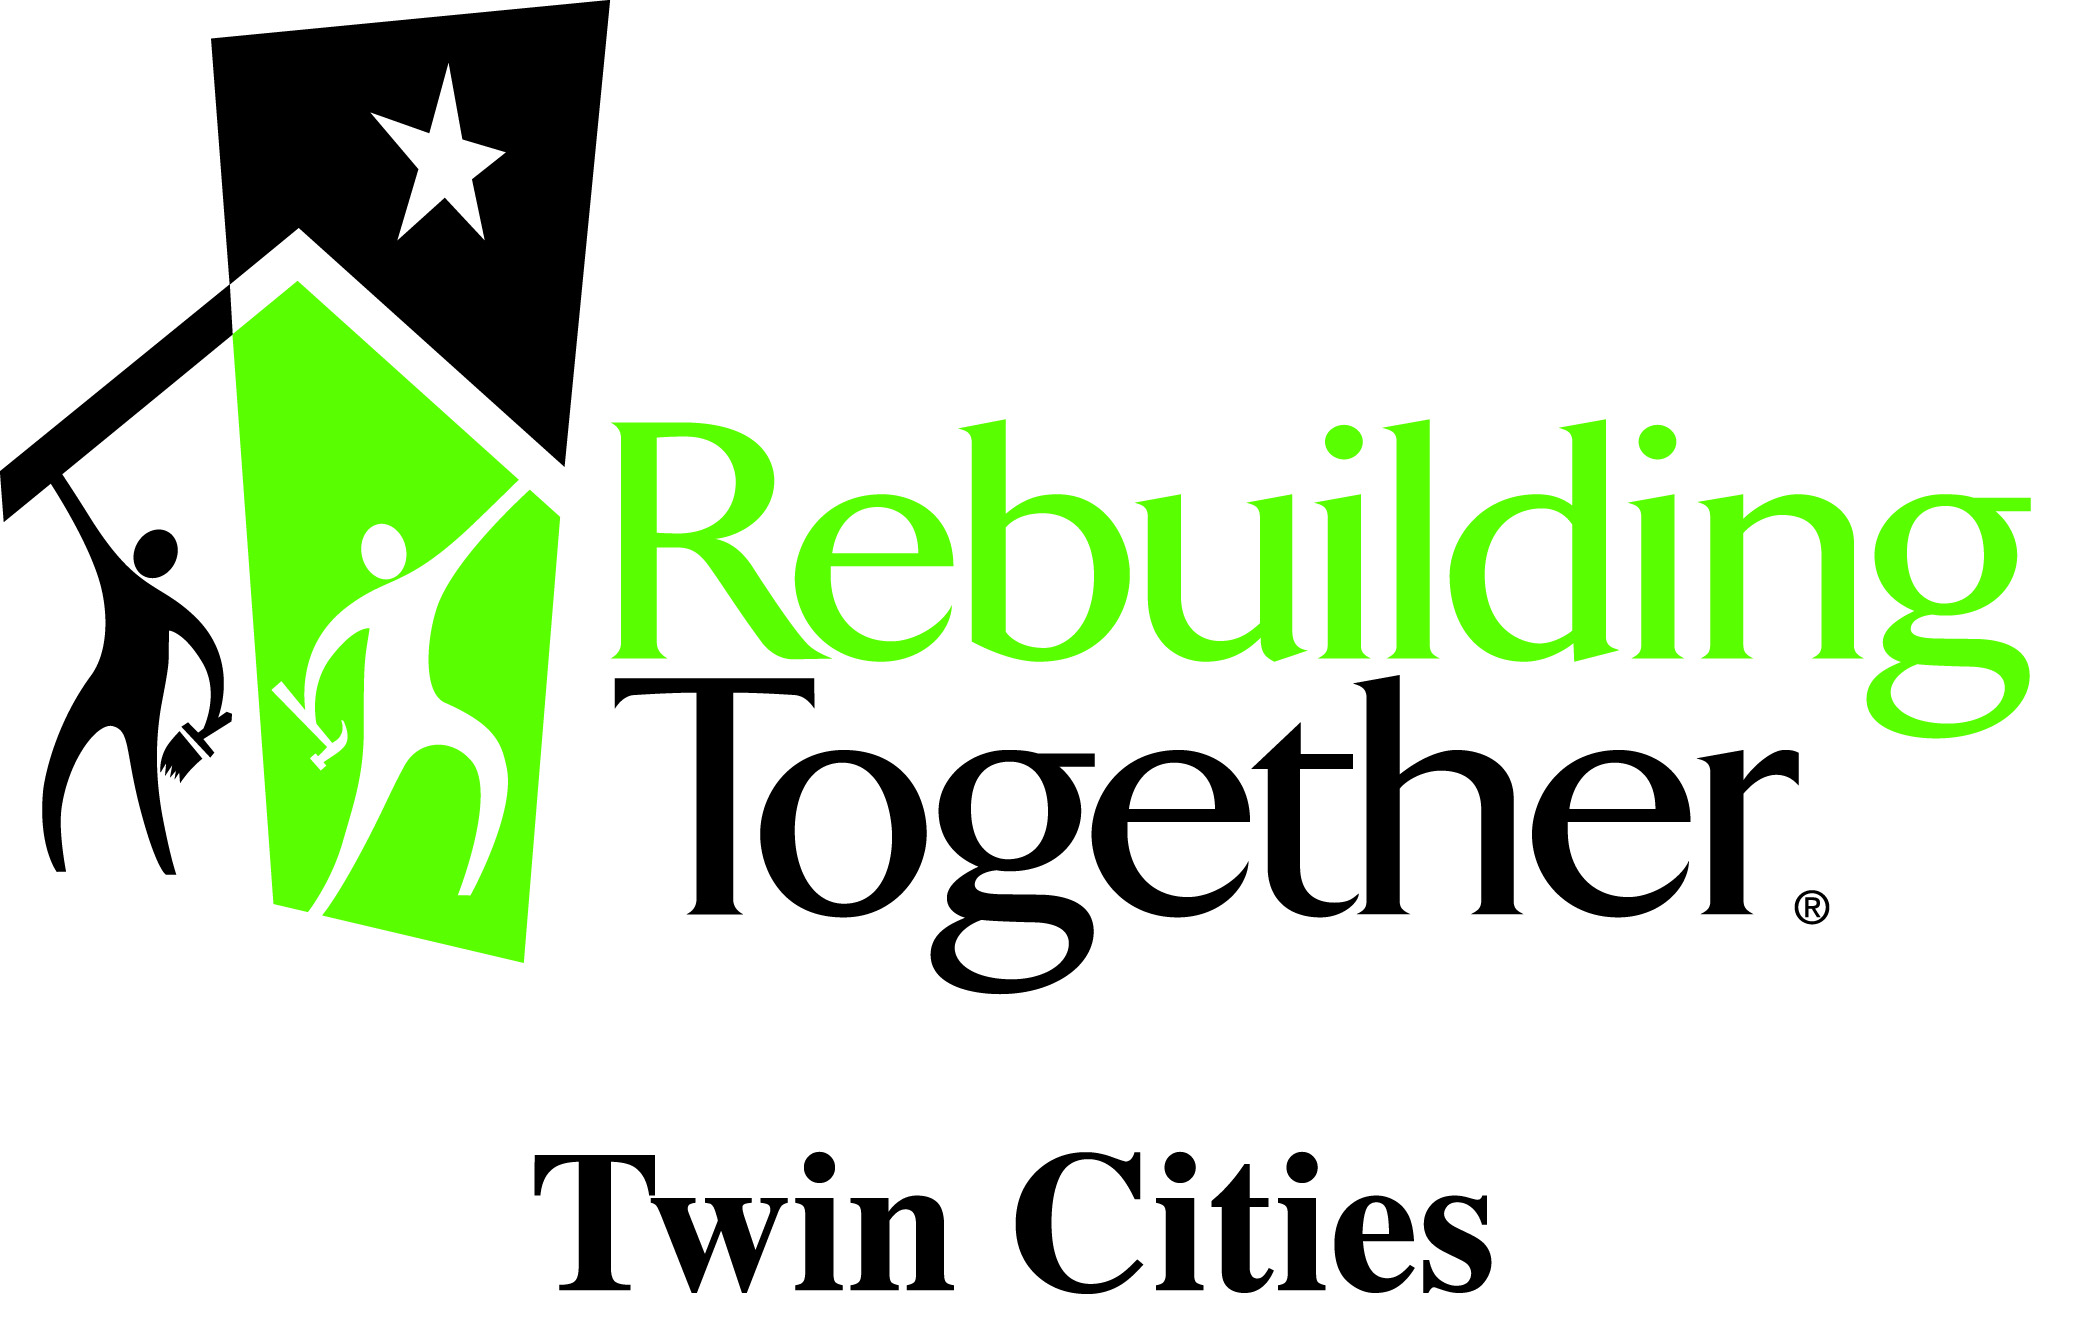 Rebuilding Together Twin Cities logo